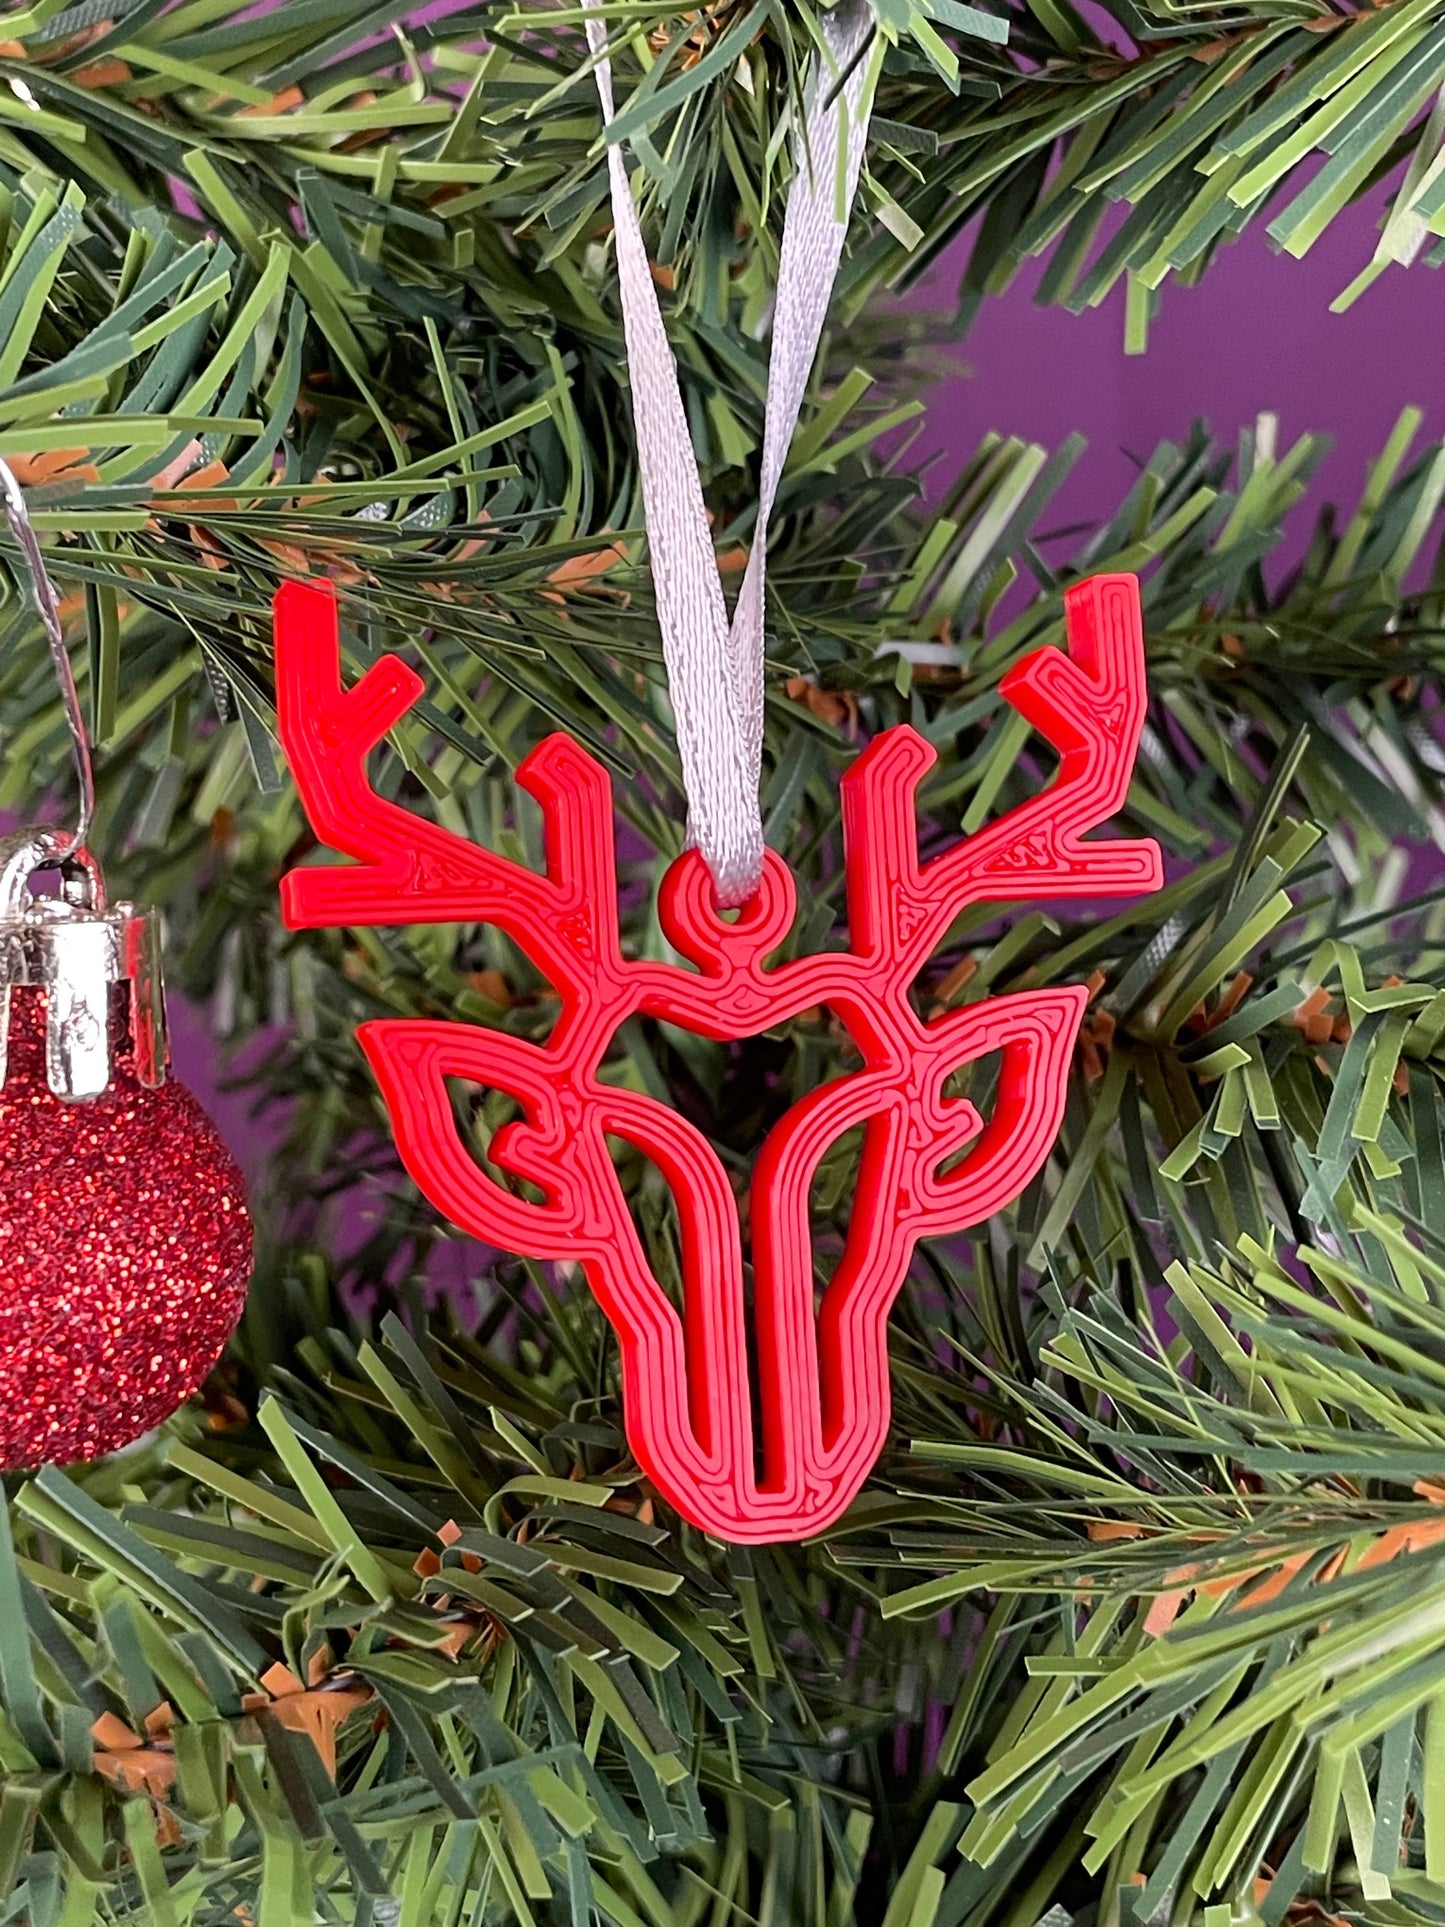 A close up of a modern reindeer ornament printed in red filament hung on a christmas tree with a purple background.